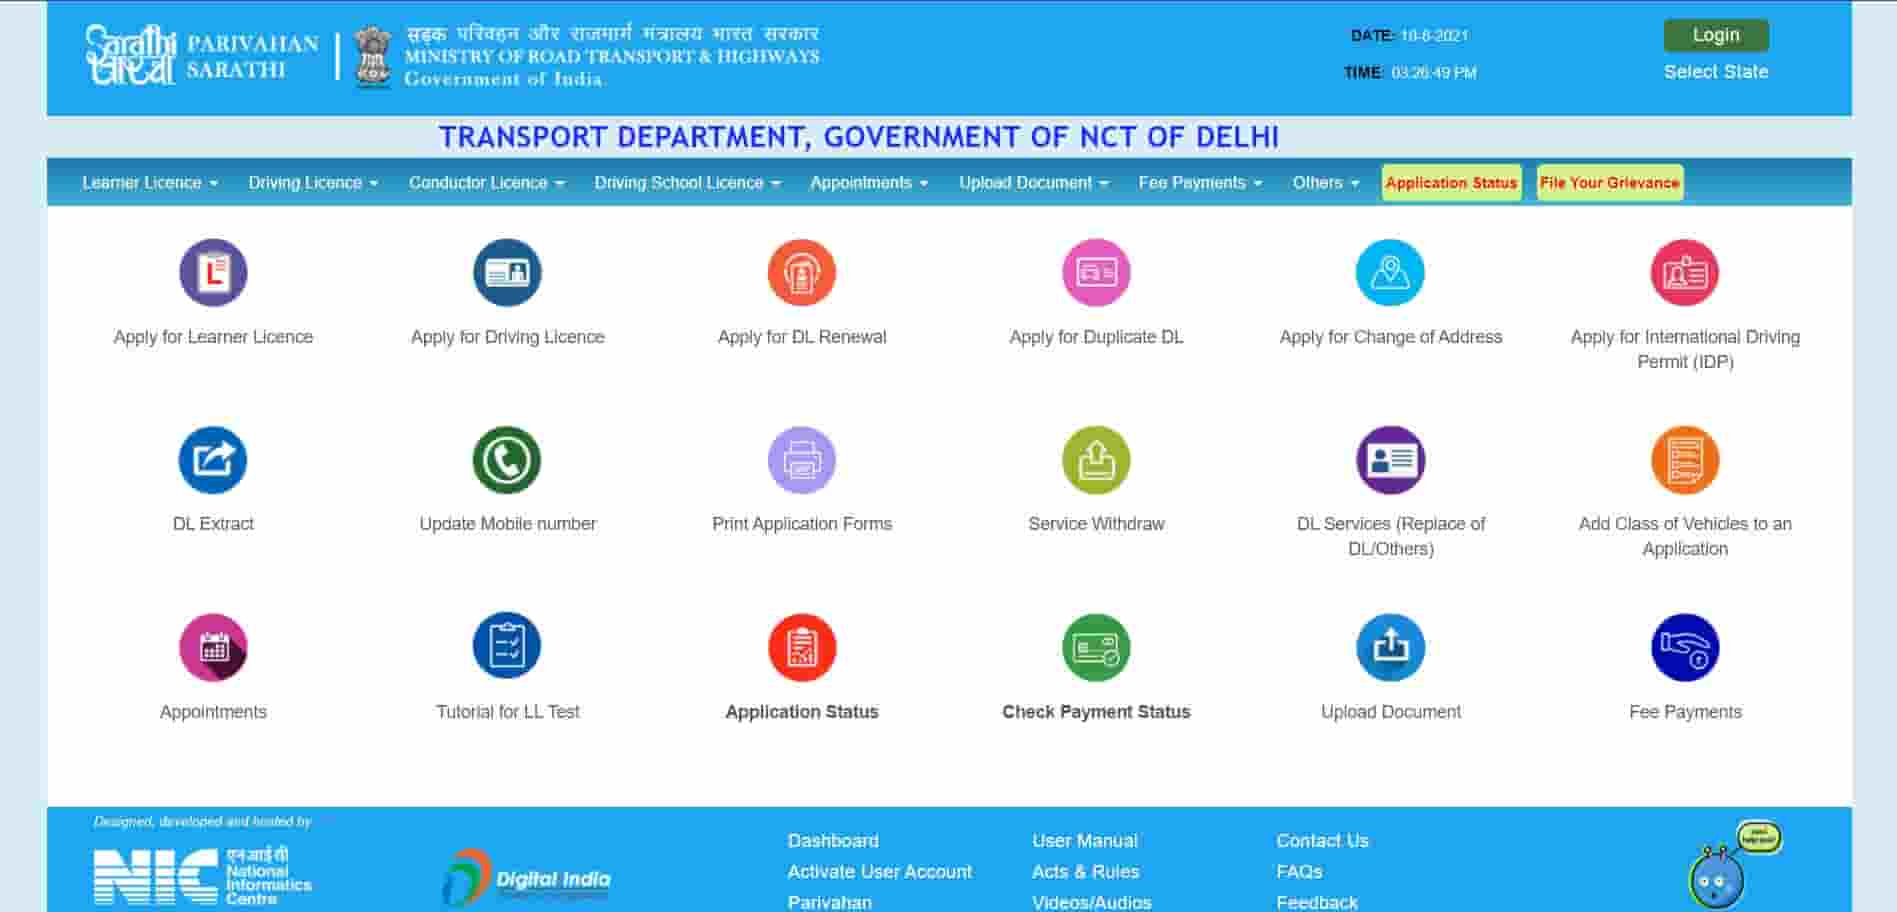 how to avail faceless rto services online, faceless services, driving license online, delhi rto services, 33 faceless rto services, avail faceless rto services, learner driving license, new delhi rto services